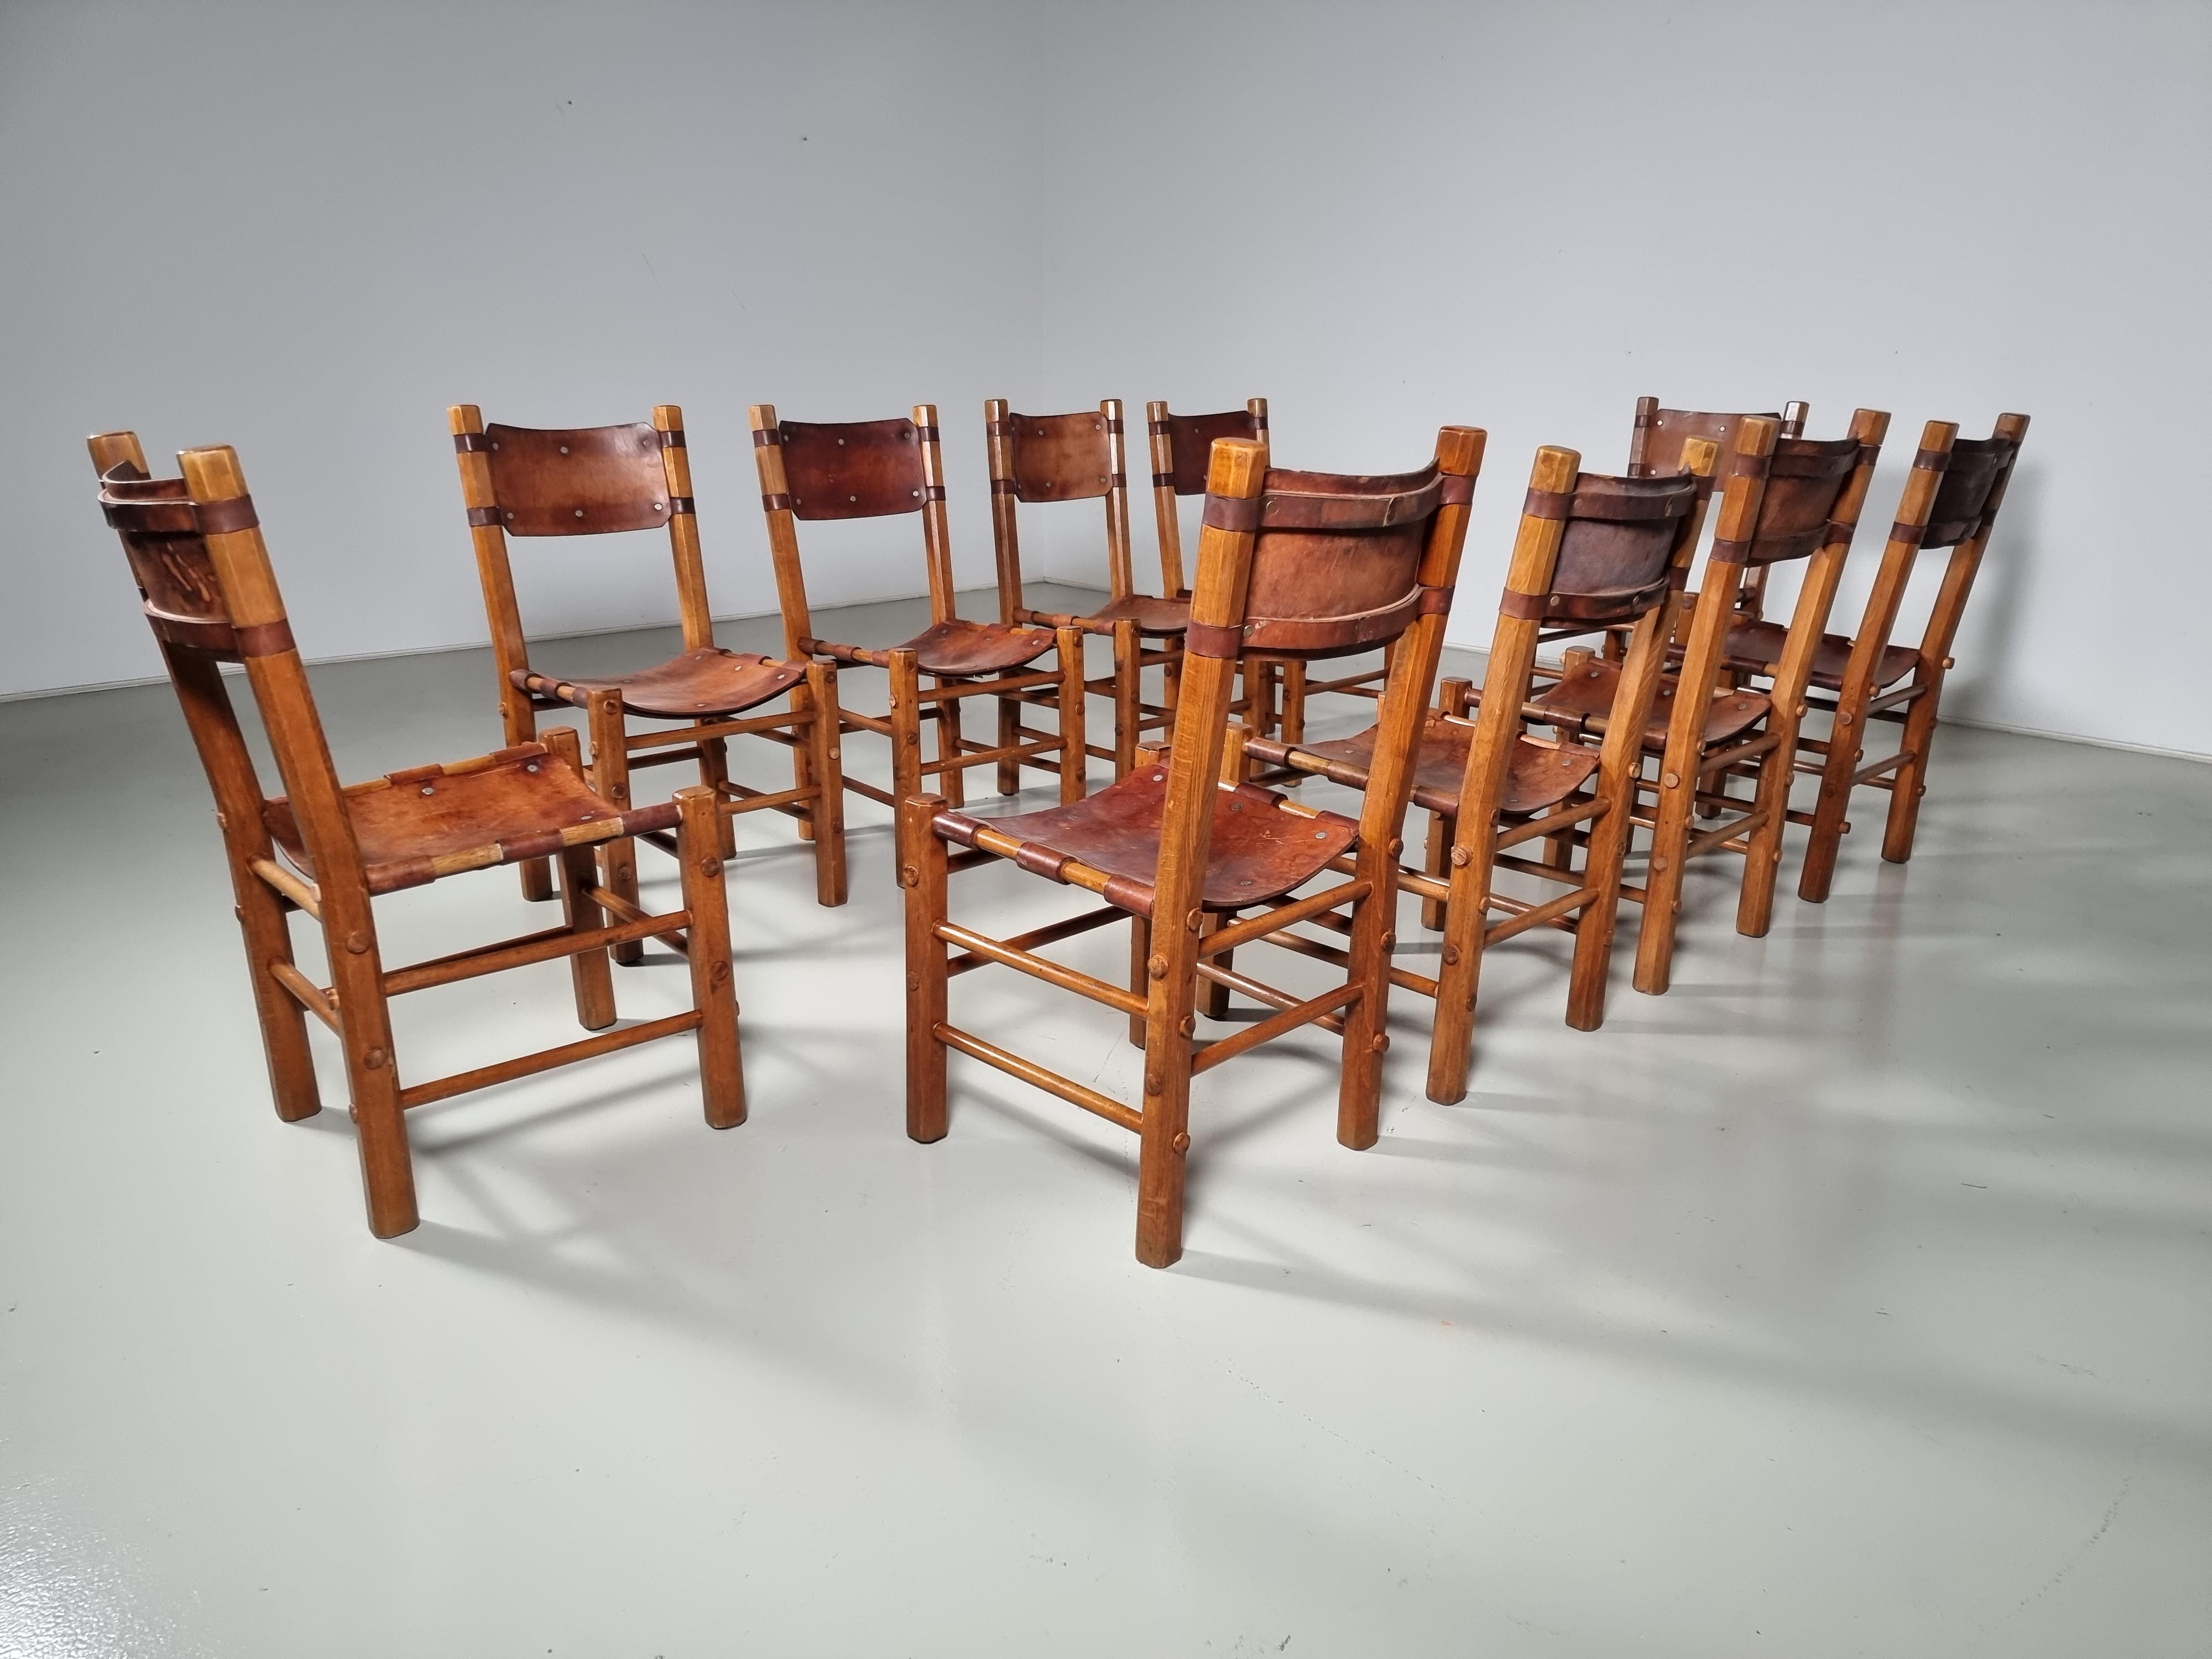 European Set of 10 Rustic Dining Chairs in Beech Wood and Leather, 1960s